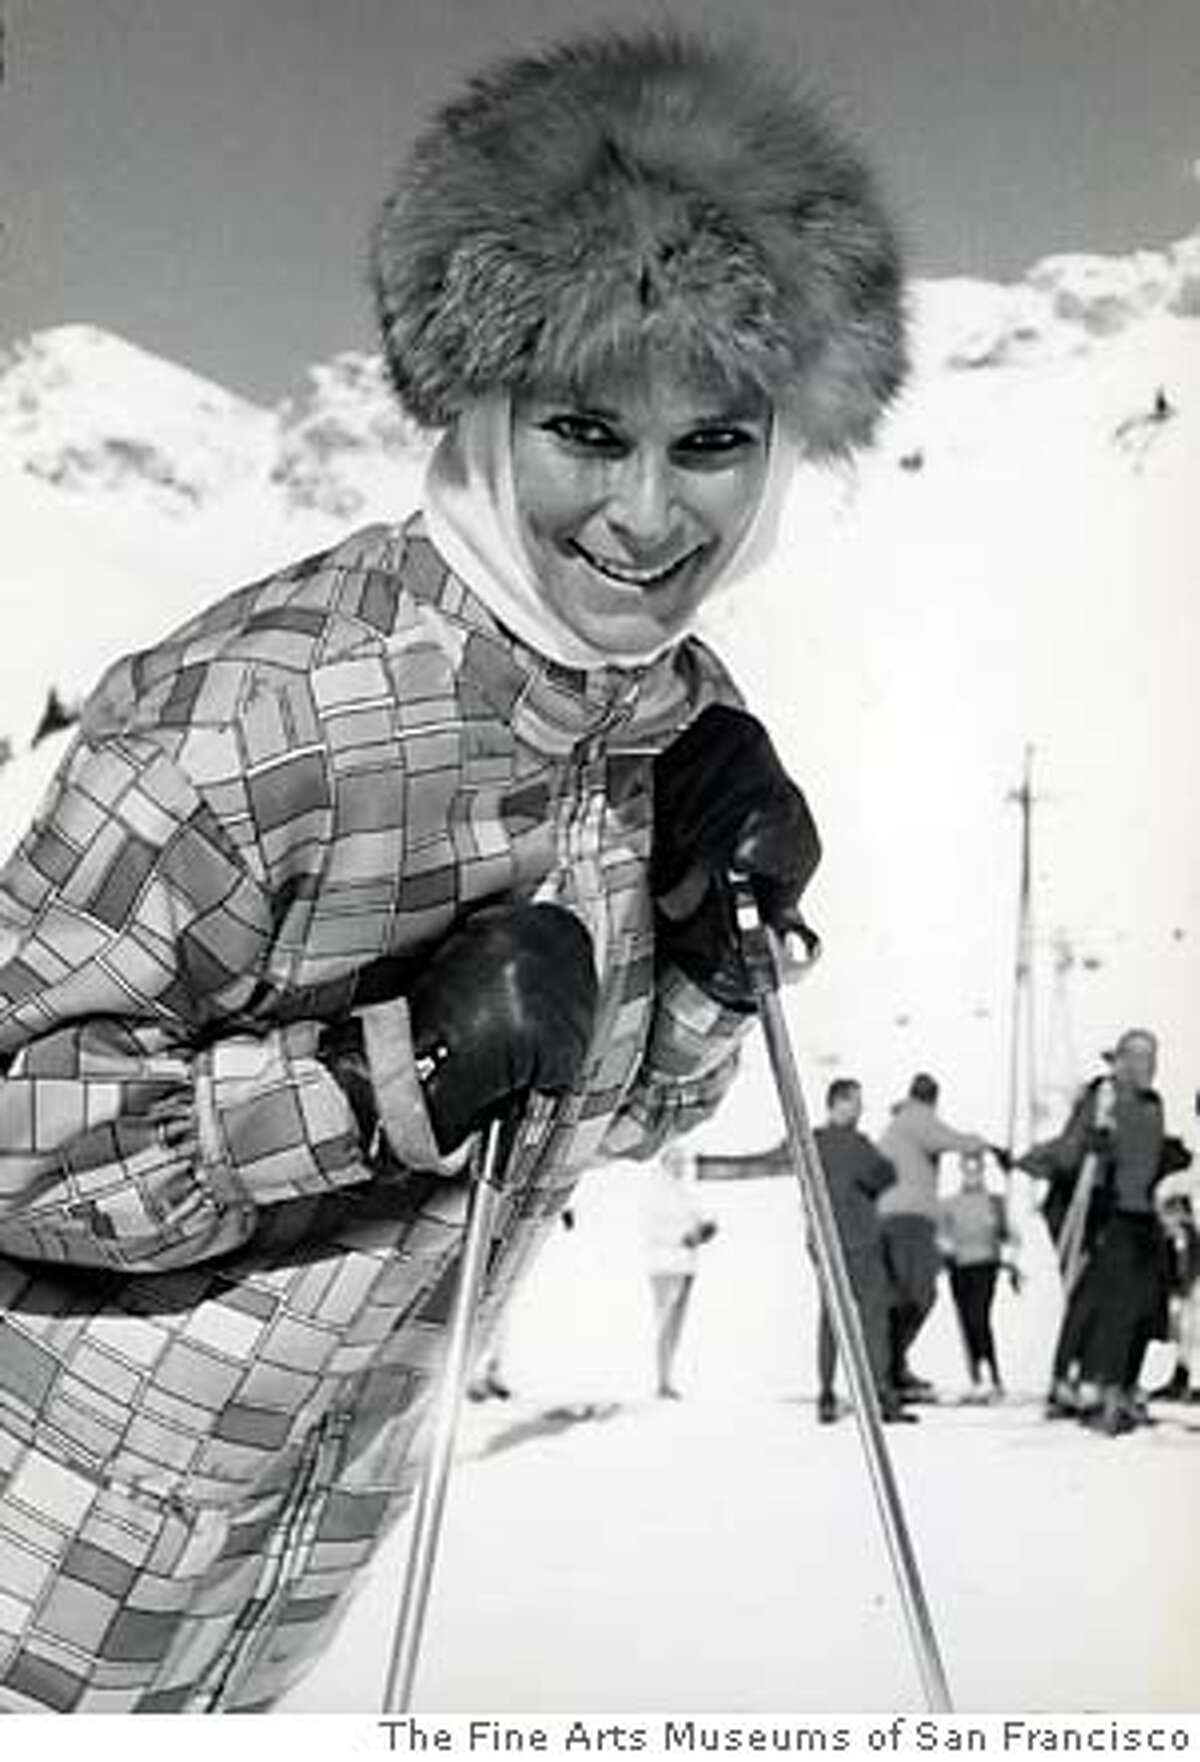 Nan Kempner skiing in Gstaad, Switzerland. Gstaad was a favorite retreat for the family, and Kempner was known for dressing stylishly on the slopes. courtesy of The Fine Arts Museums of San Francisco